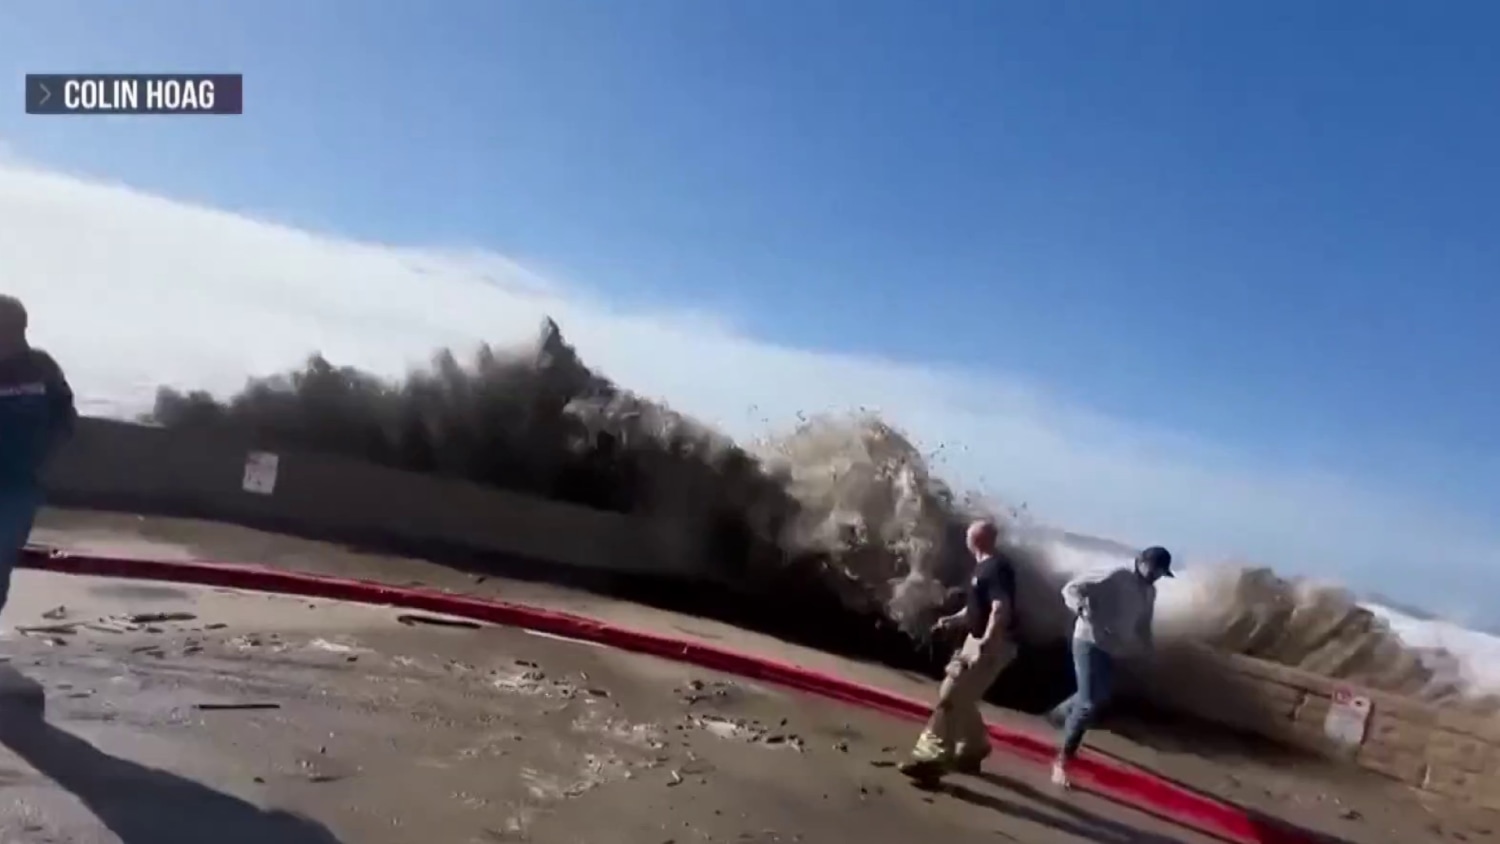 The Waves Are Massive in California Right Now